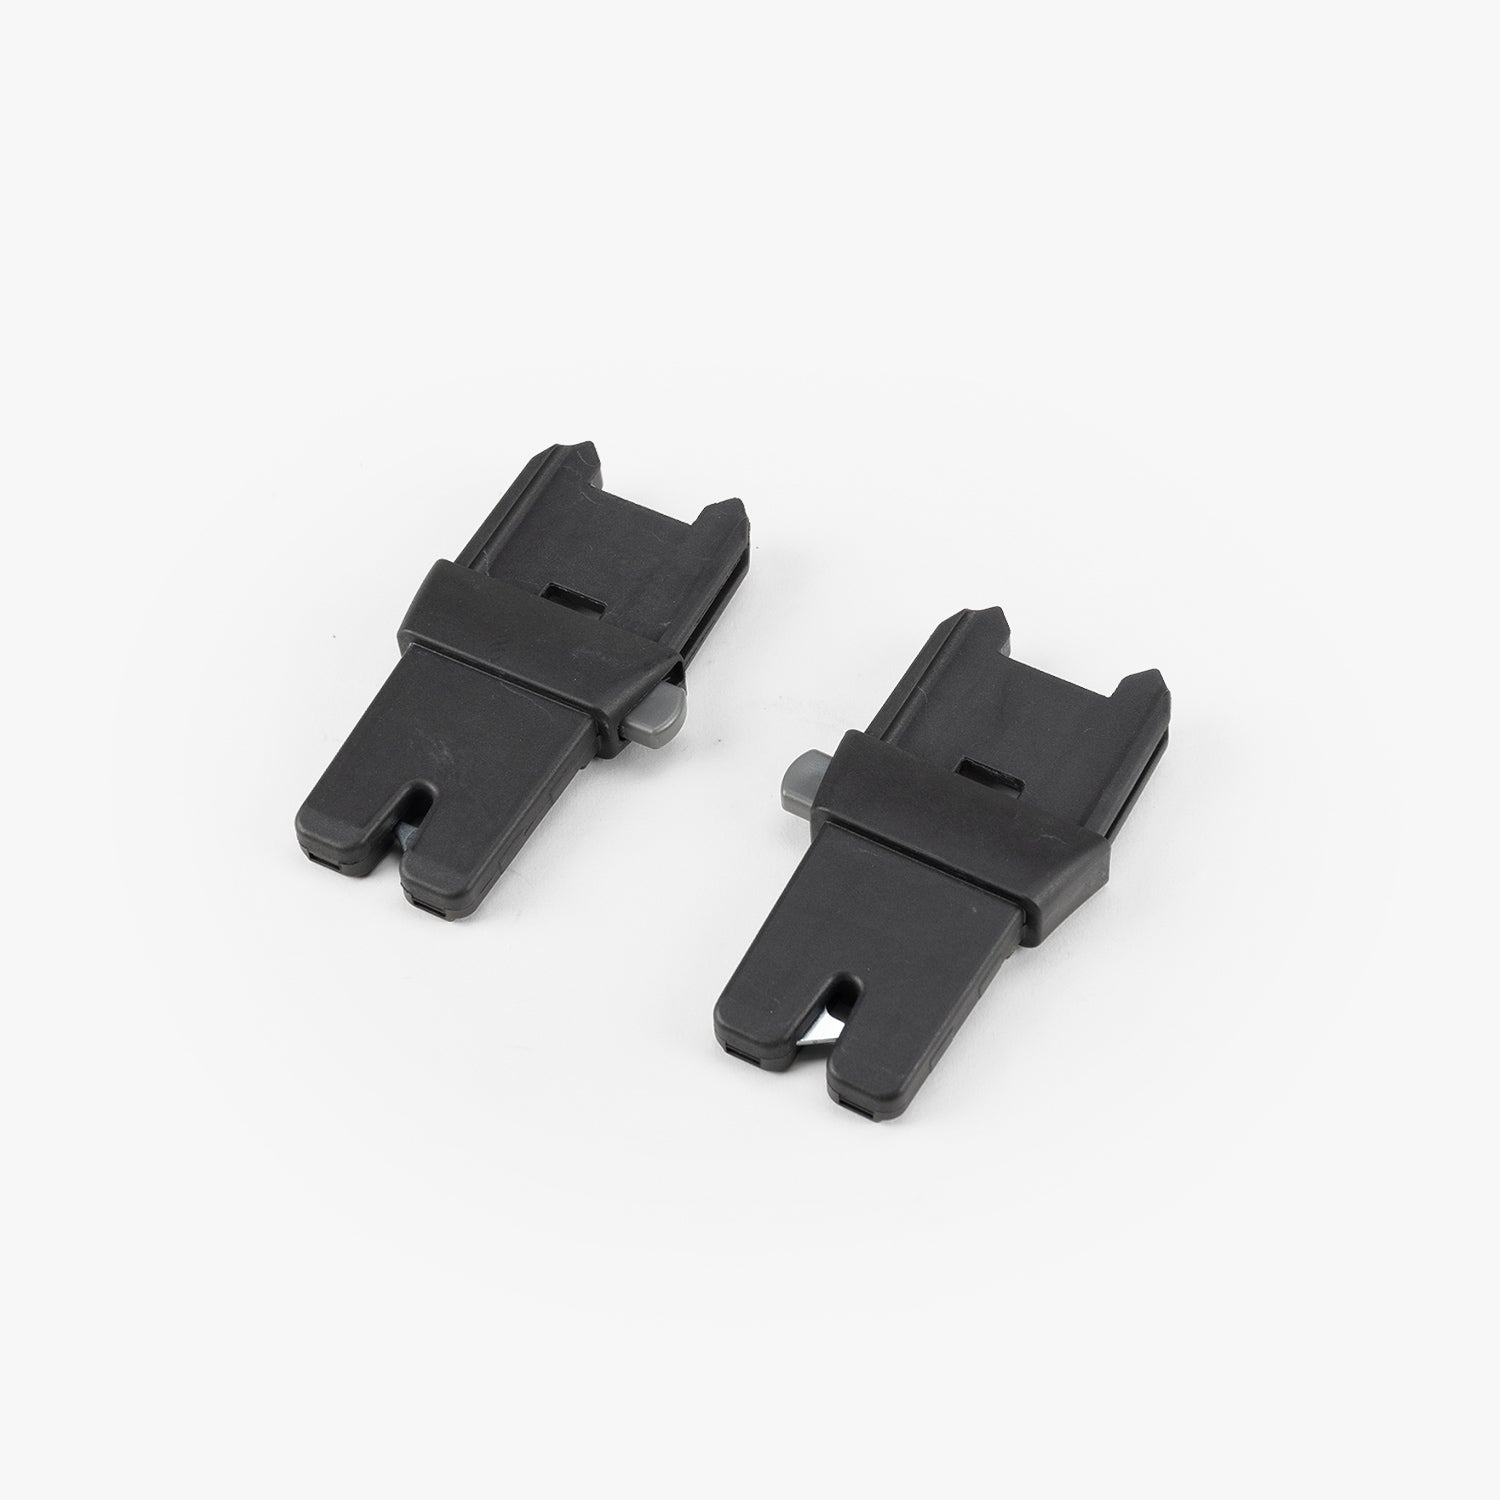 S-1 UppaBaby Car Seat Adapter